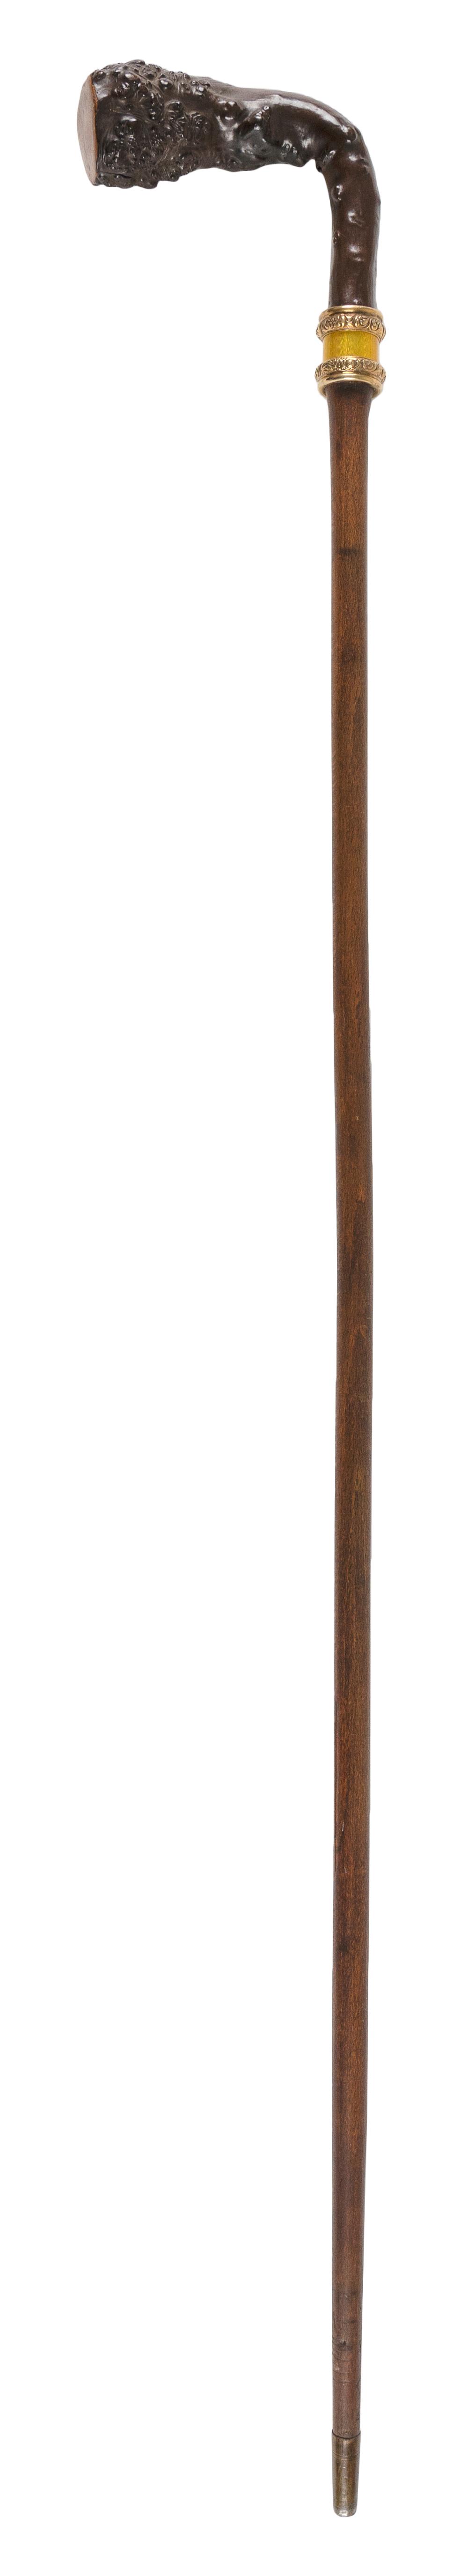 ENGLISH ROOT HANDLED CANE LATE 30b5be